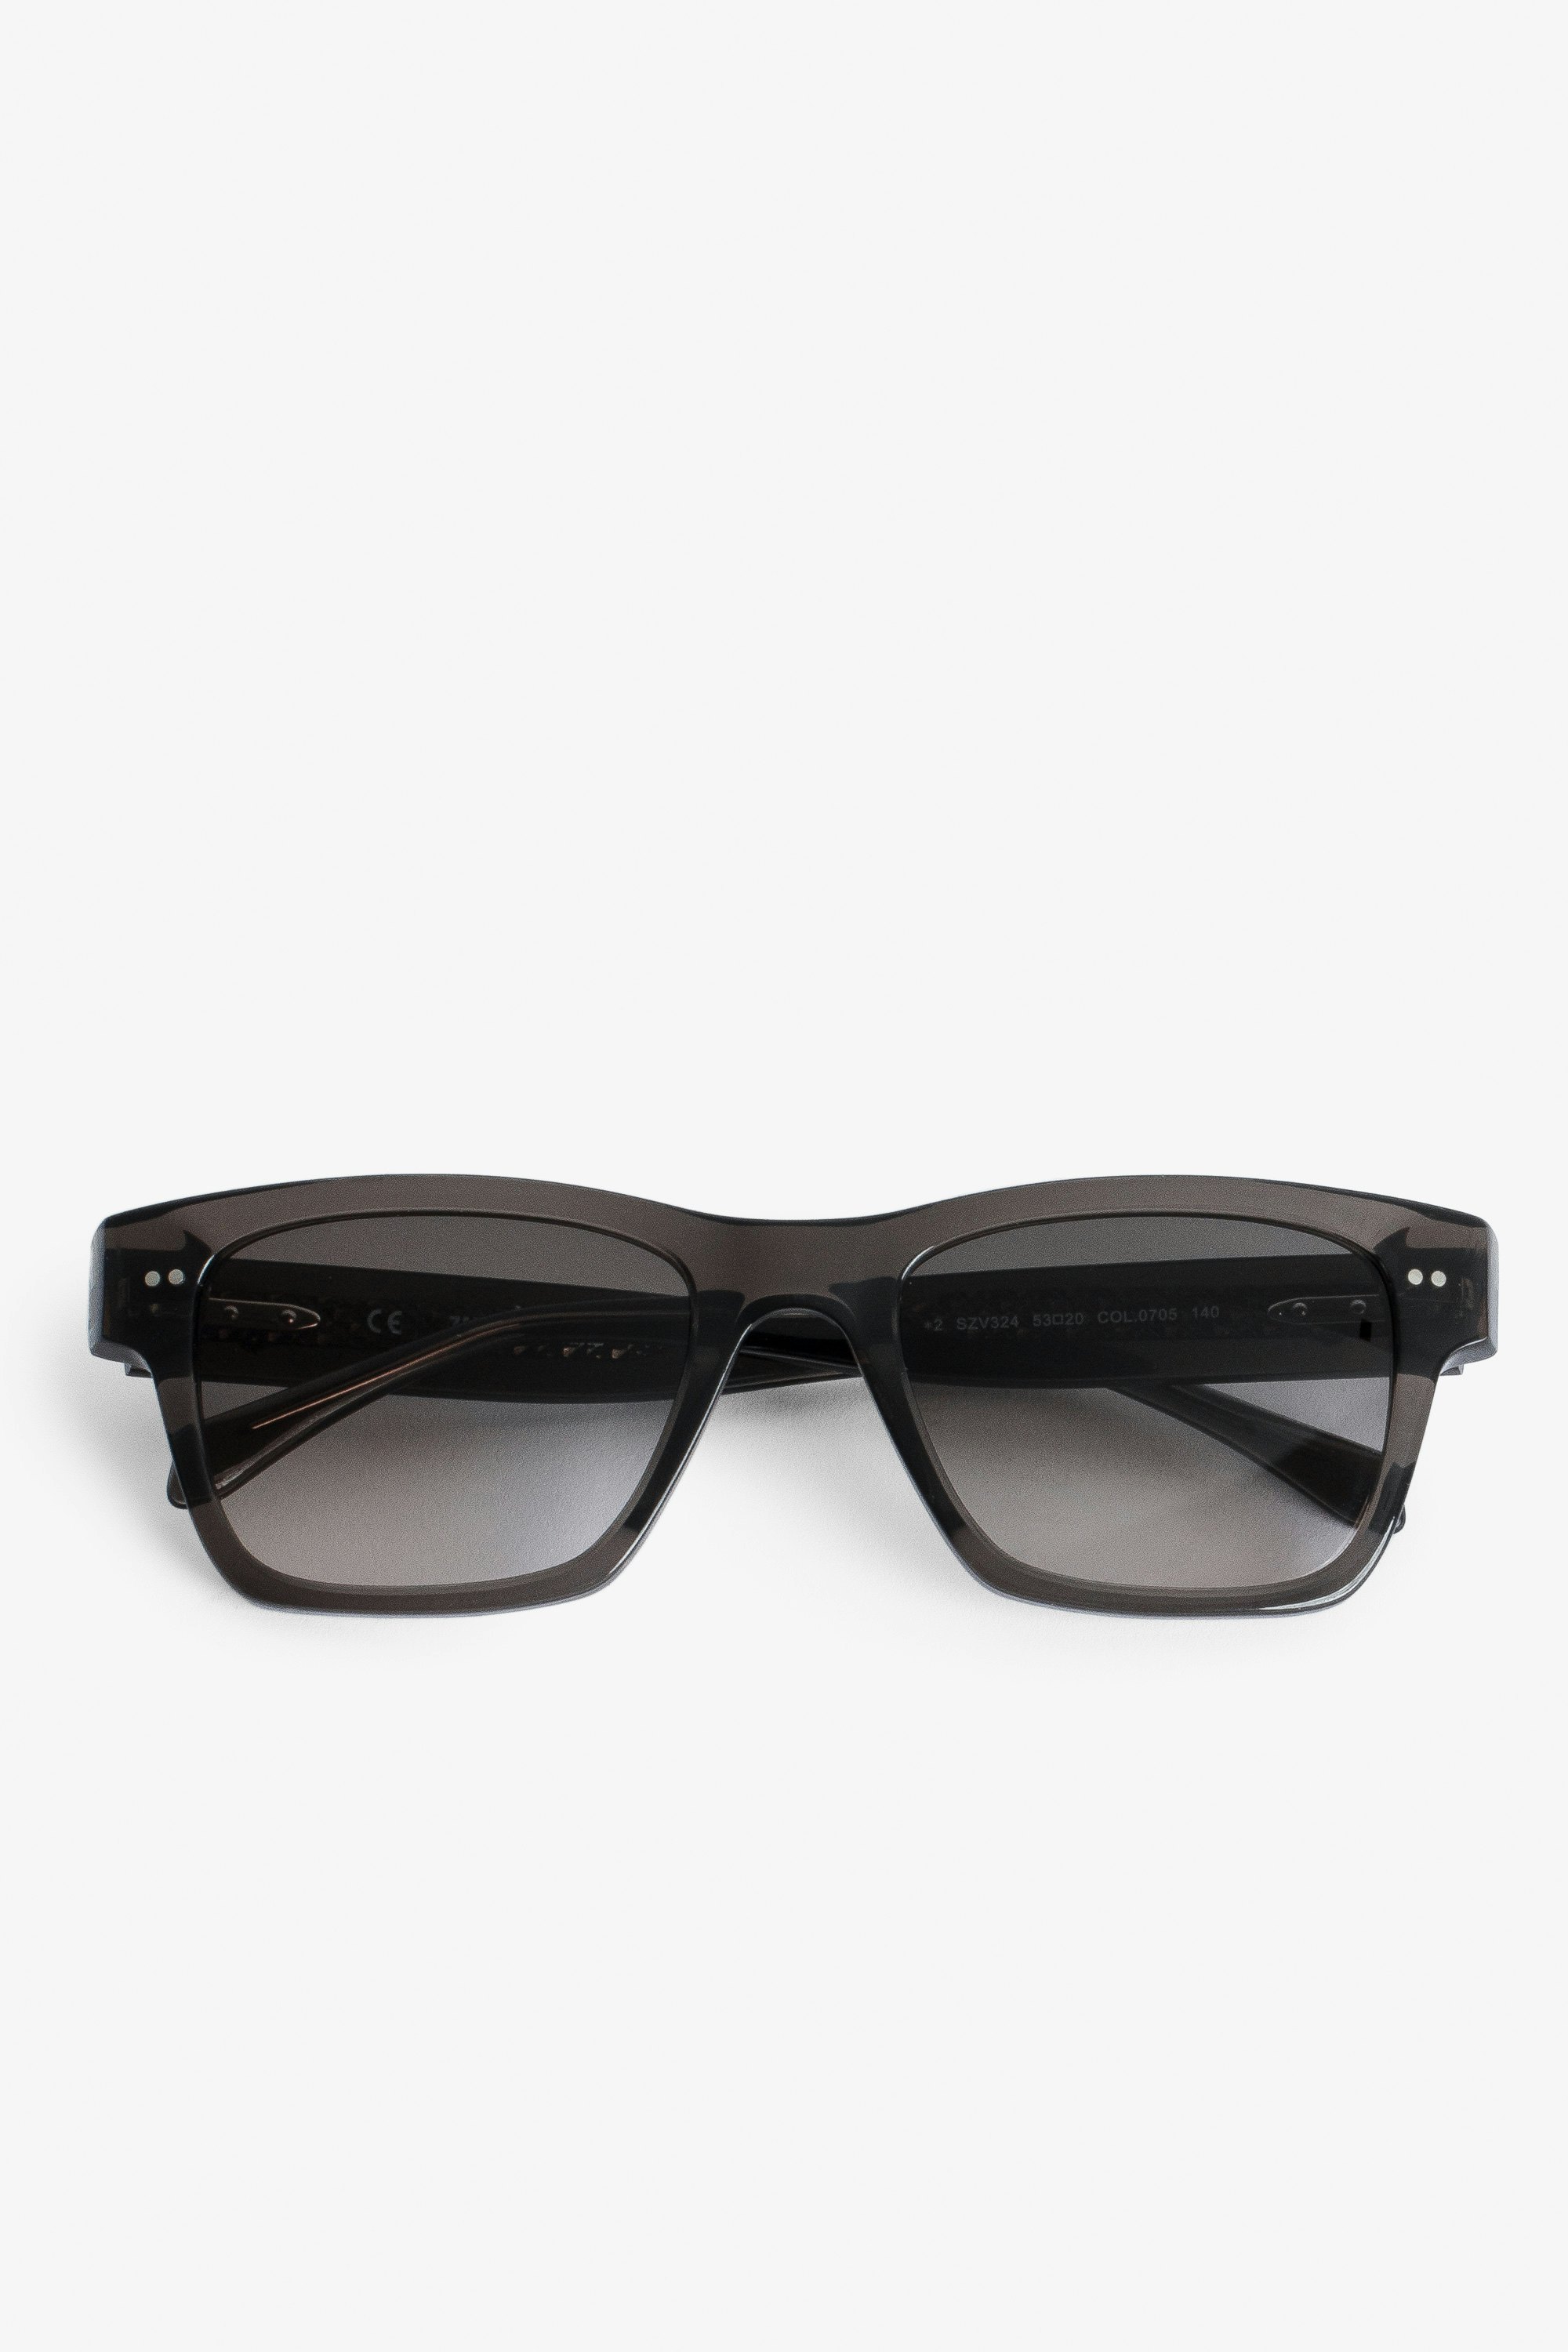 Transparent Wings Sunglasses Black acetate sunglasses with wing detailing on temples and smoked lenses